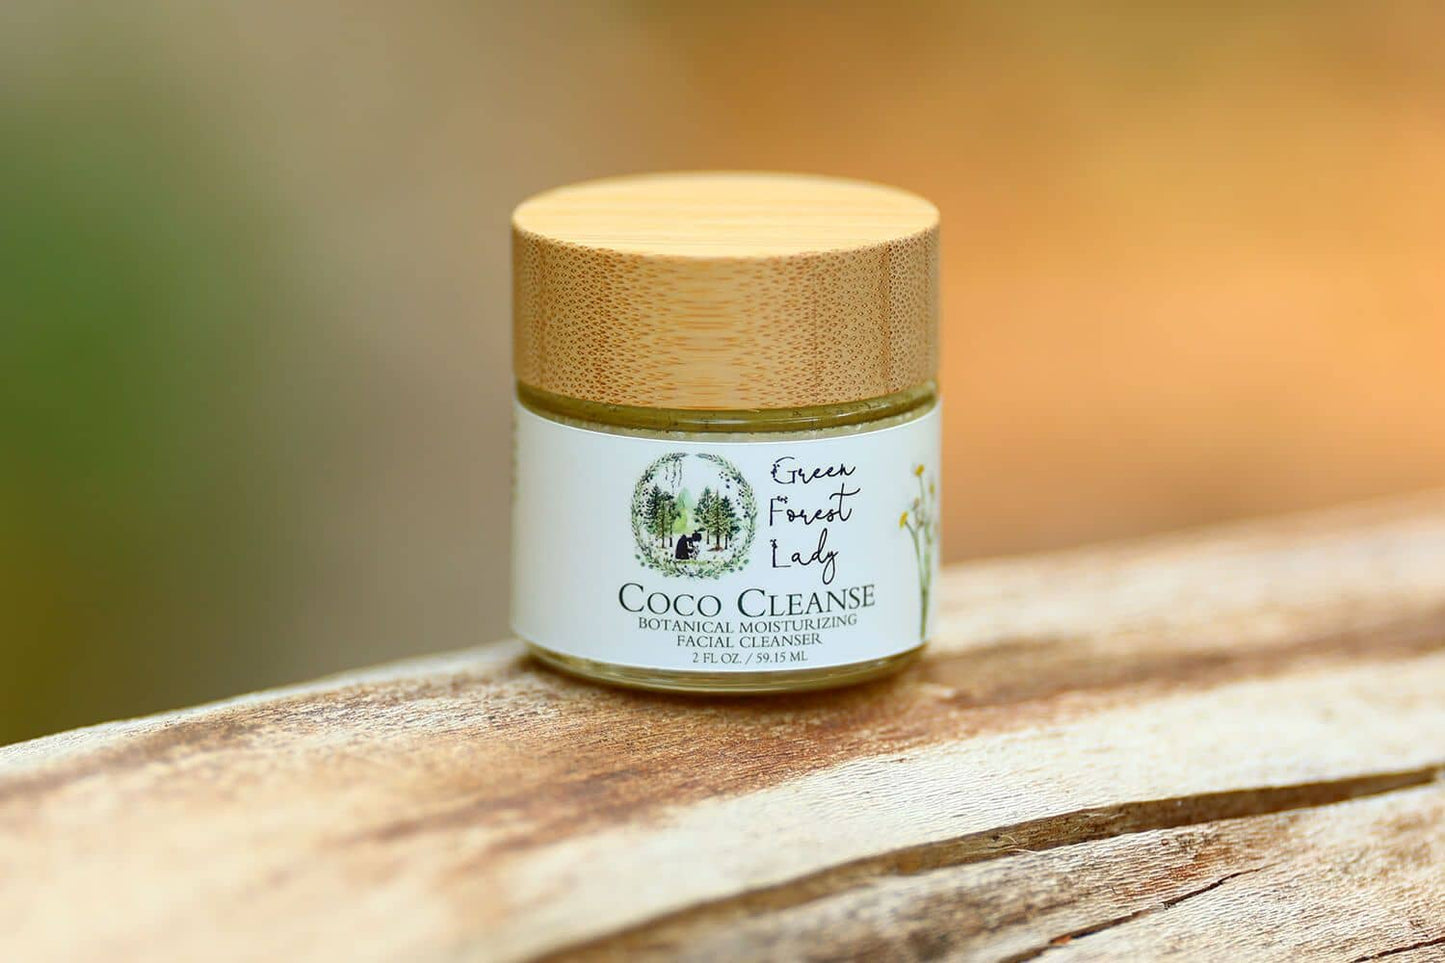 Coco Cleanse glass jar sitting on wood table